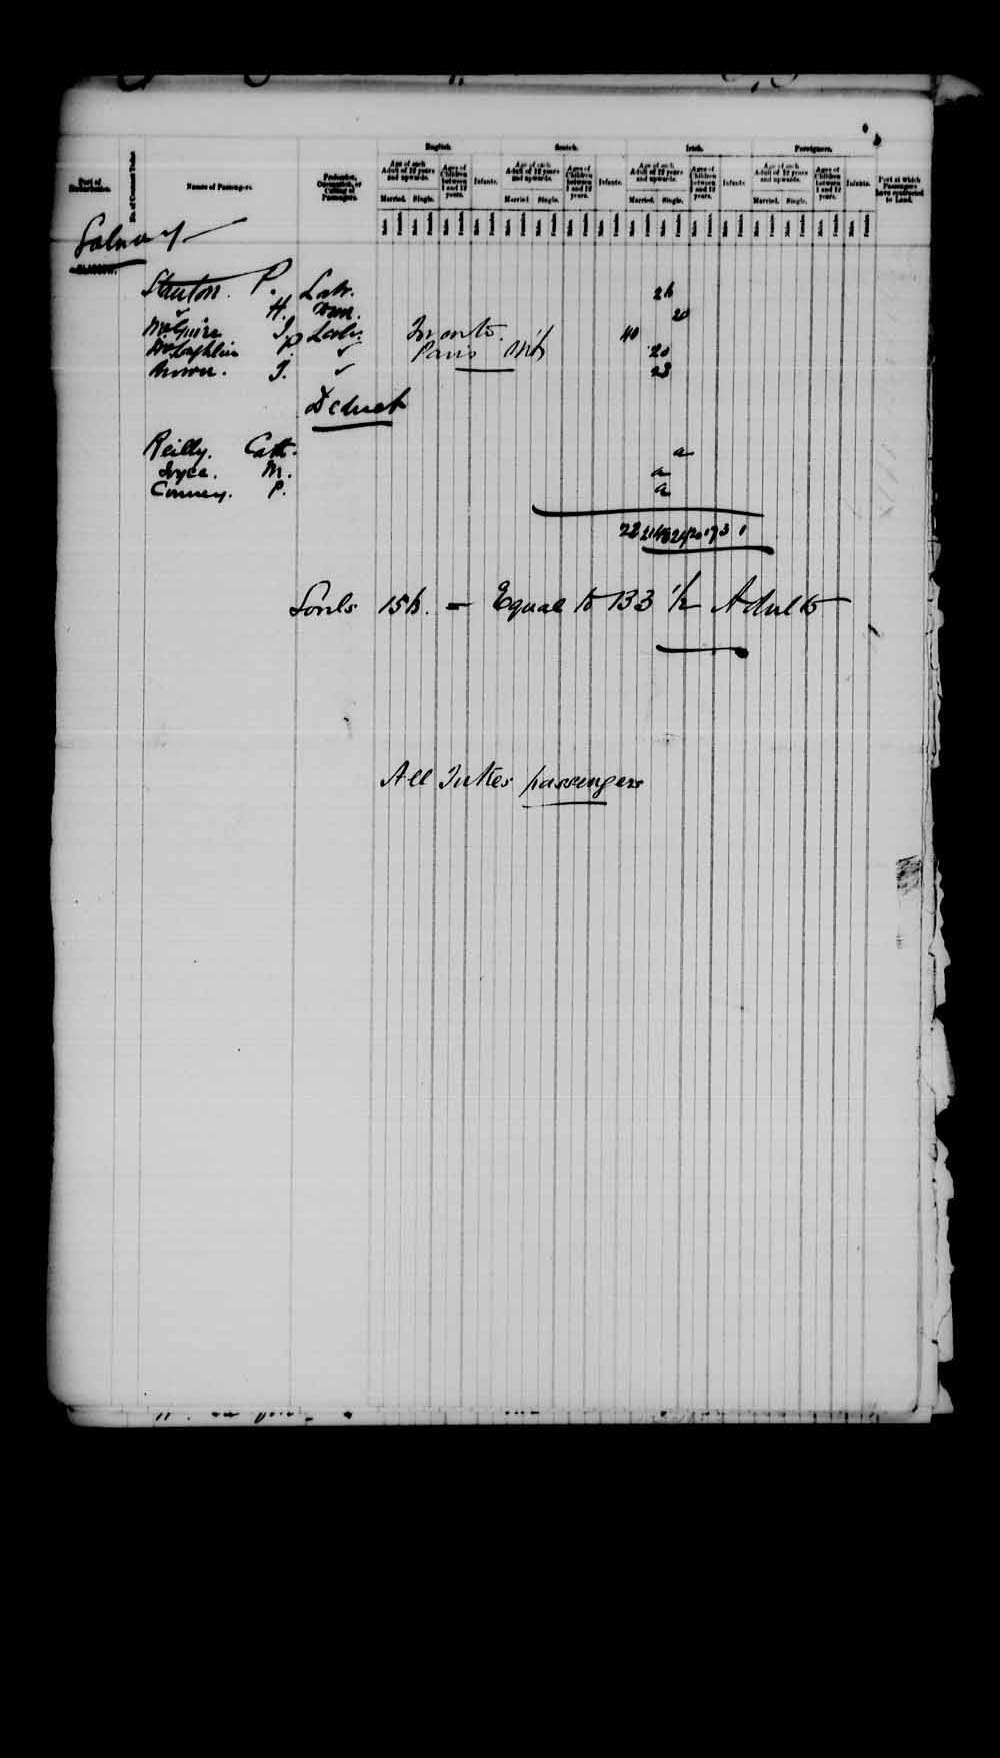 Digitized page of Passenger Lists for Image No.: e003542677